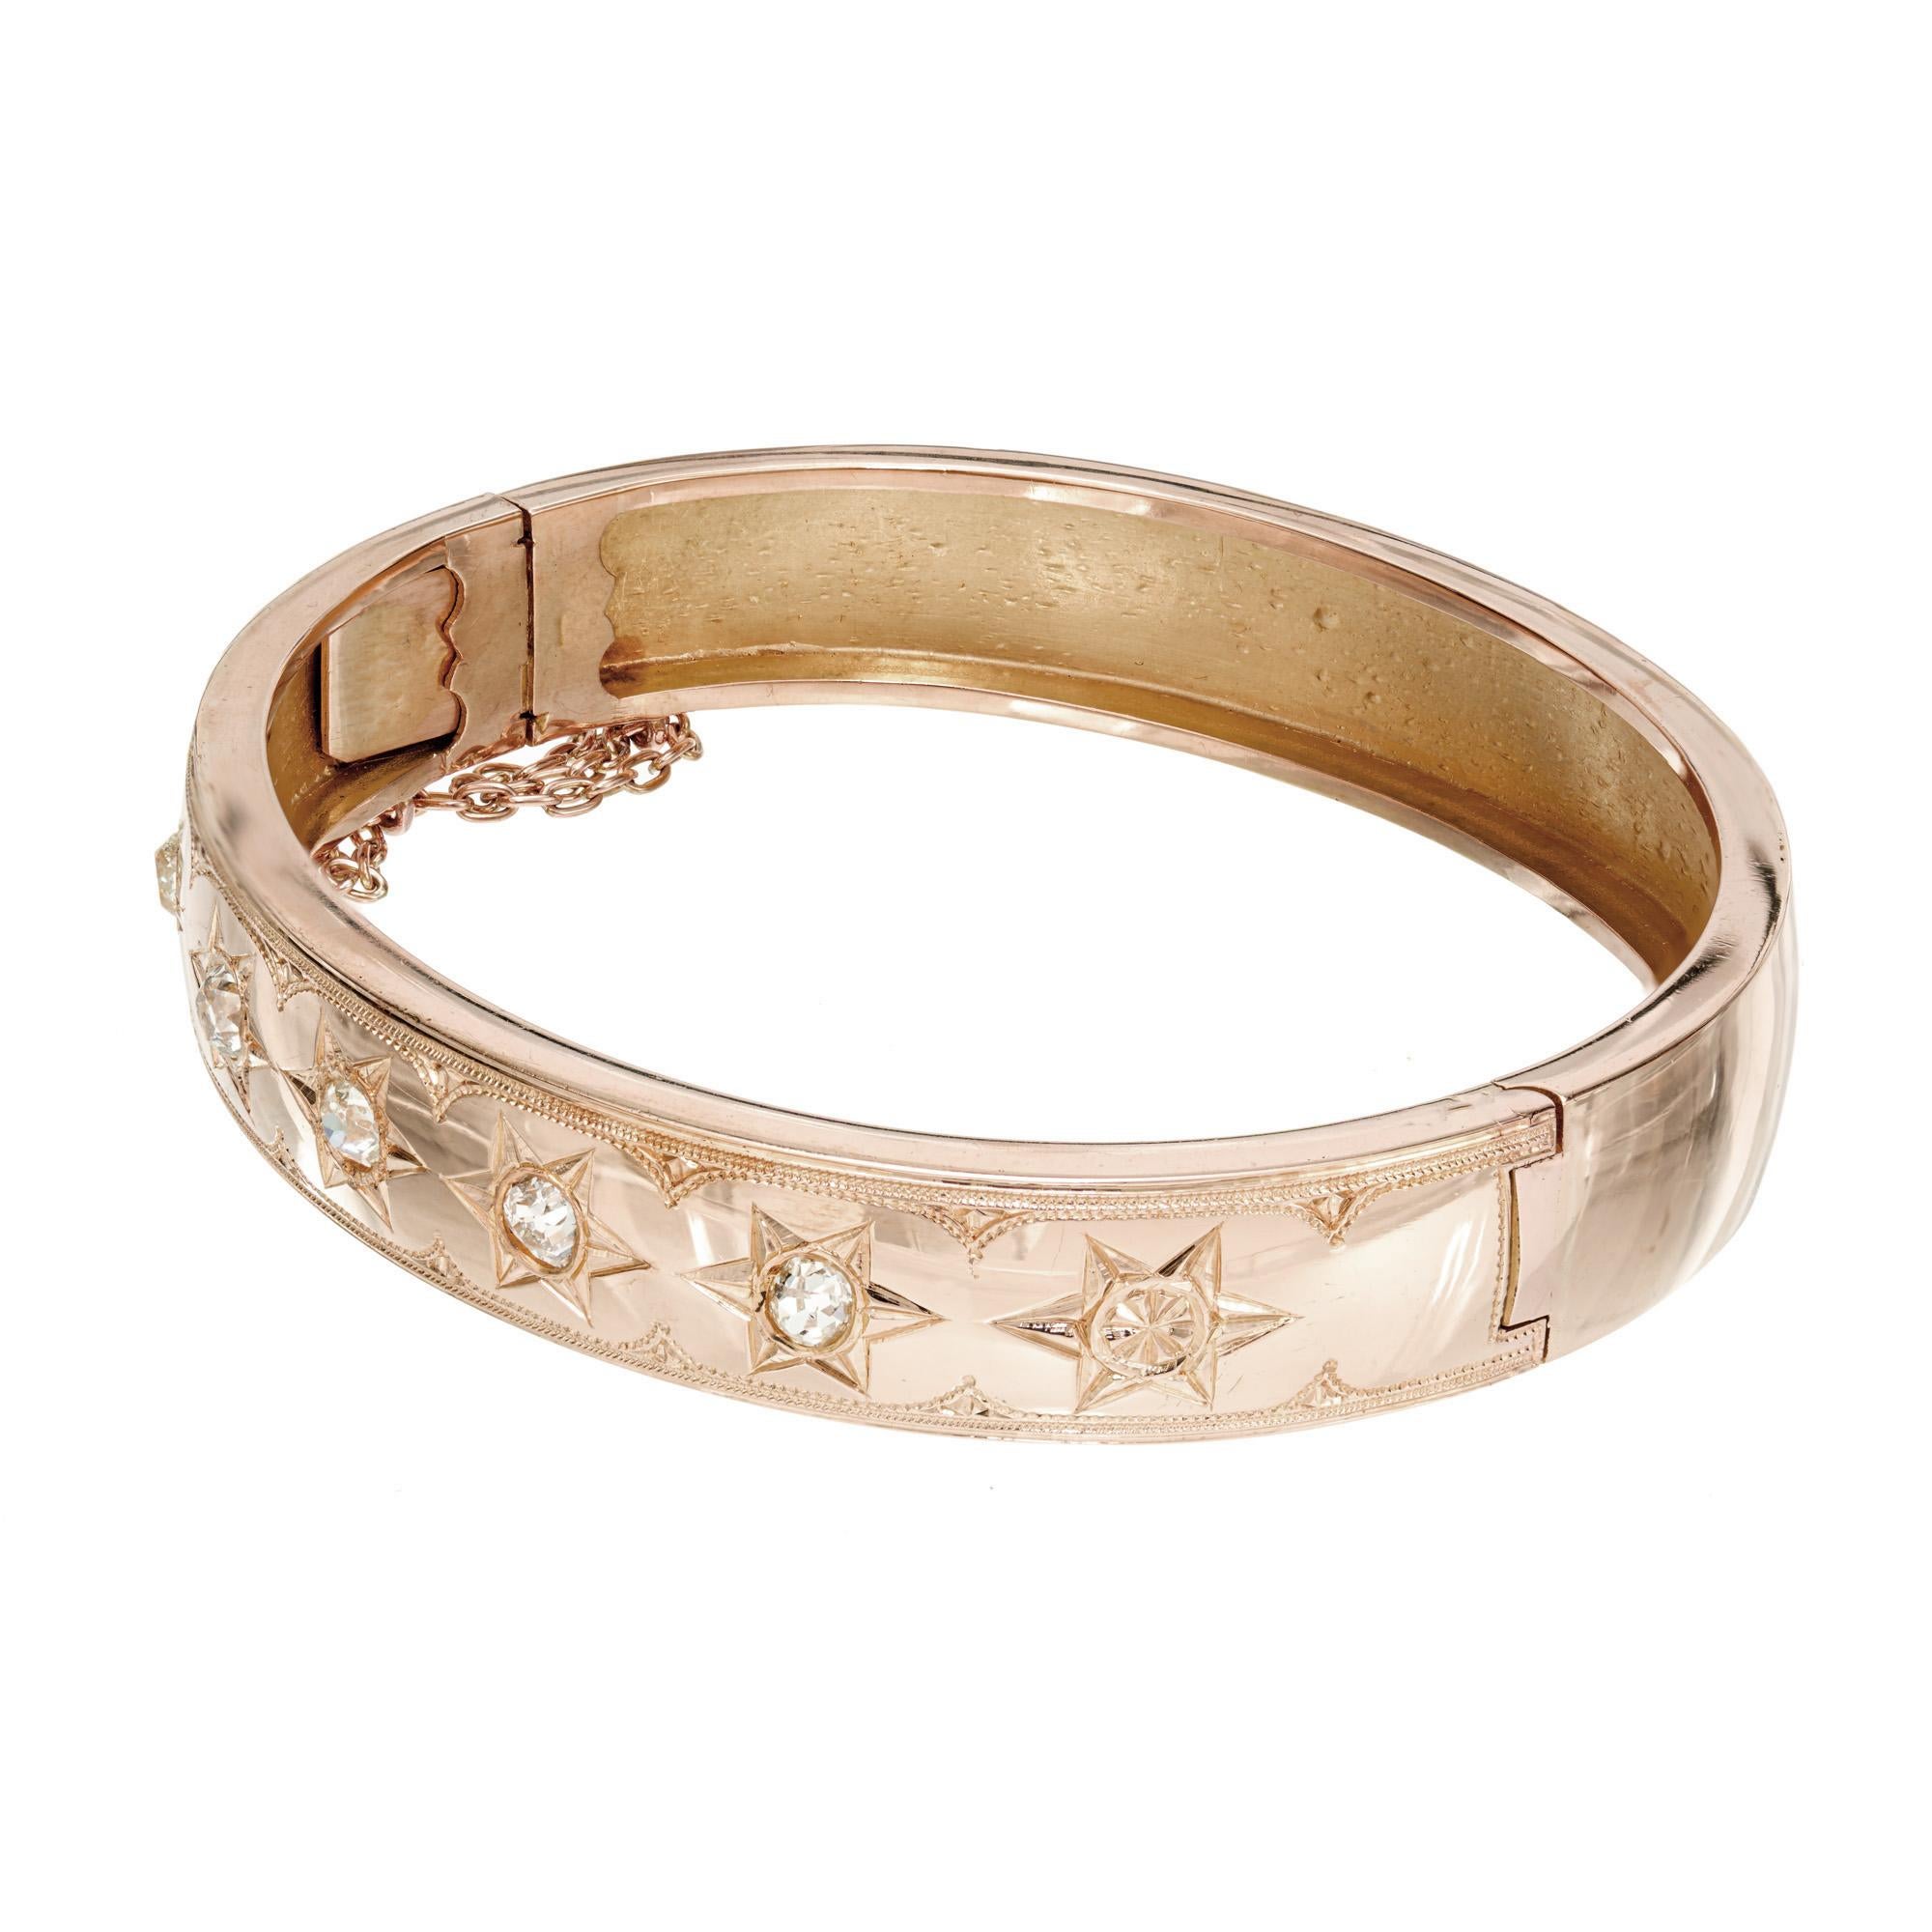 Handmade 11mm wide diamond 14k rose gold bangle bracelet from the Victorian era. circa 1850. 5 old mine cut diamonds, in 6 pointed star settings. Soft-medium rose color gold. Catch with a safety chain. 

5 old mine cut diamonds, H-I VS-SI approx.